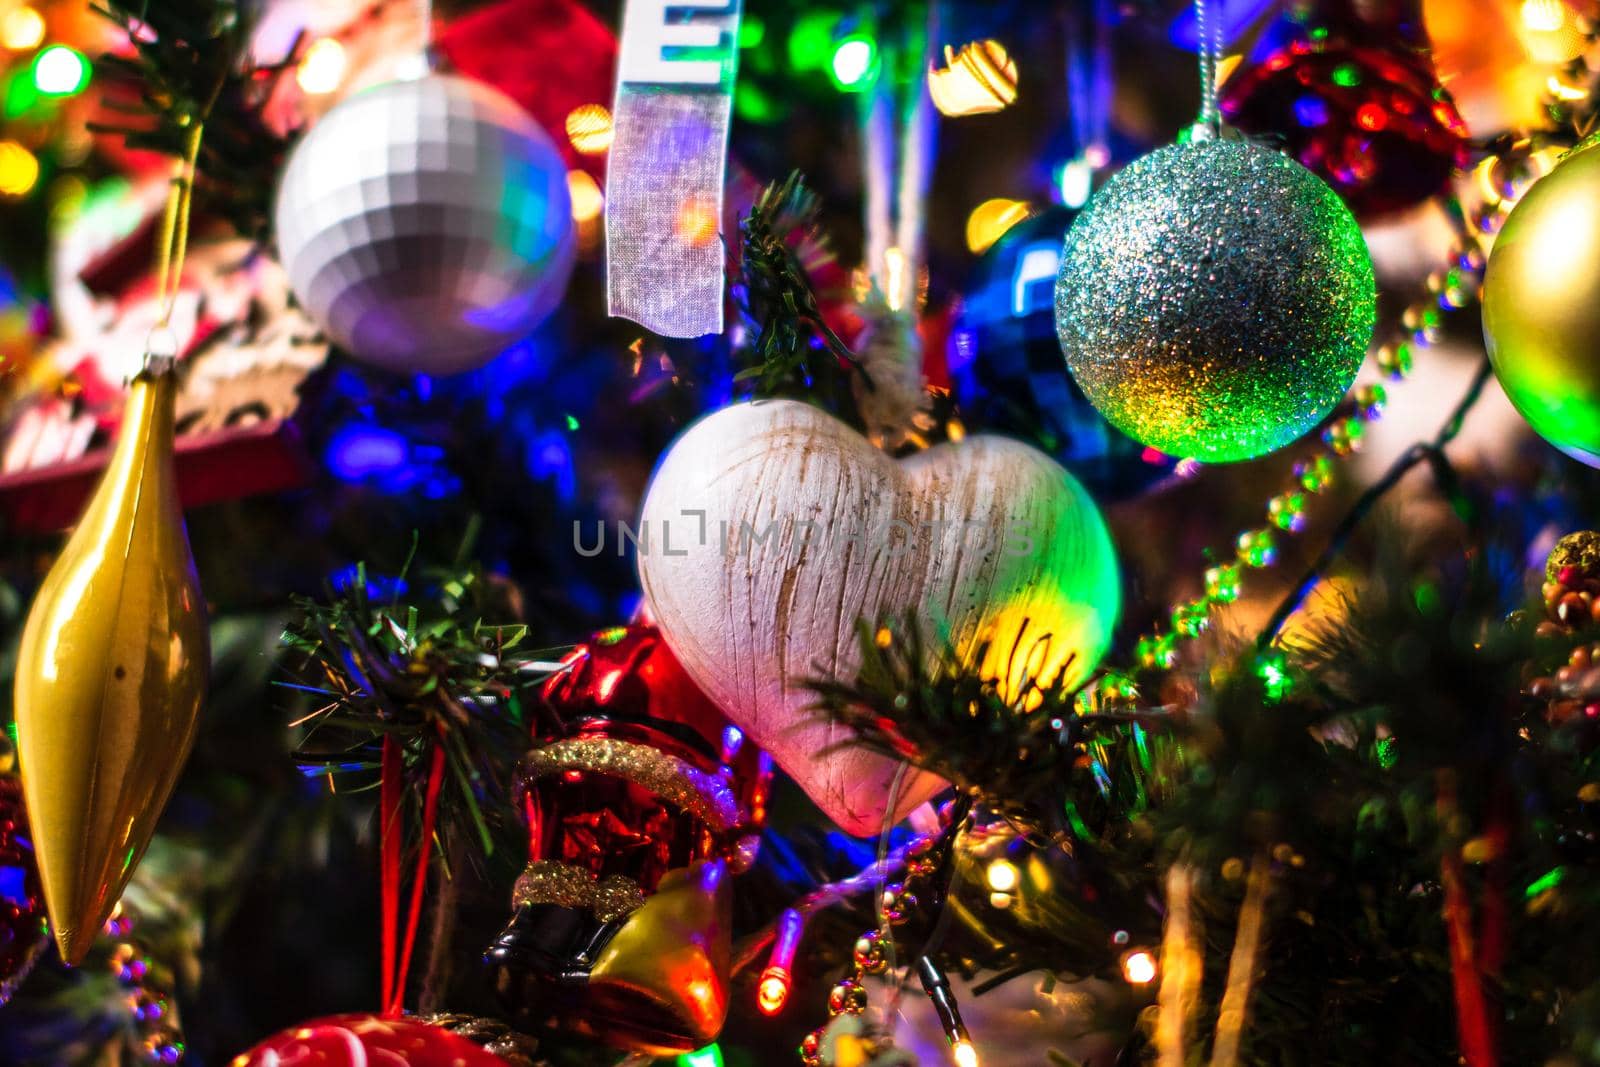 Beautiful Christmas ornaments and lights hanging in the Christmas tree by vladispas